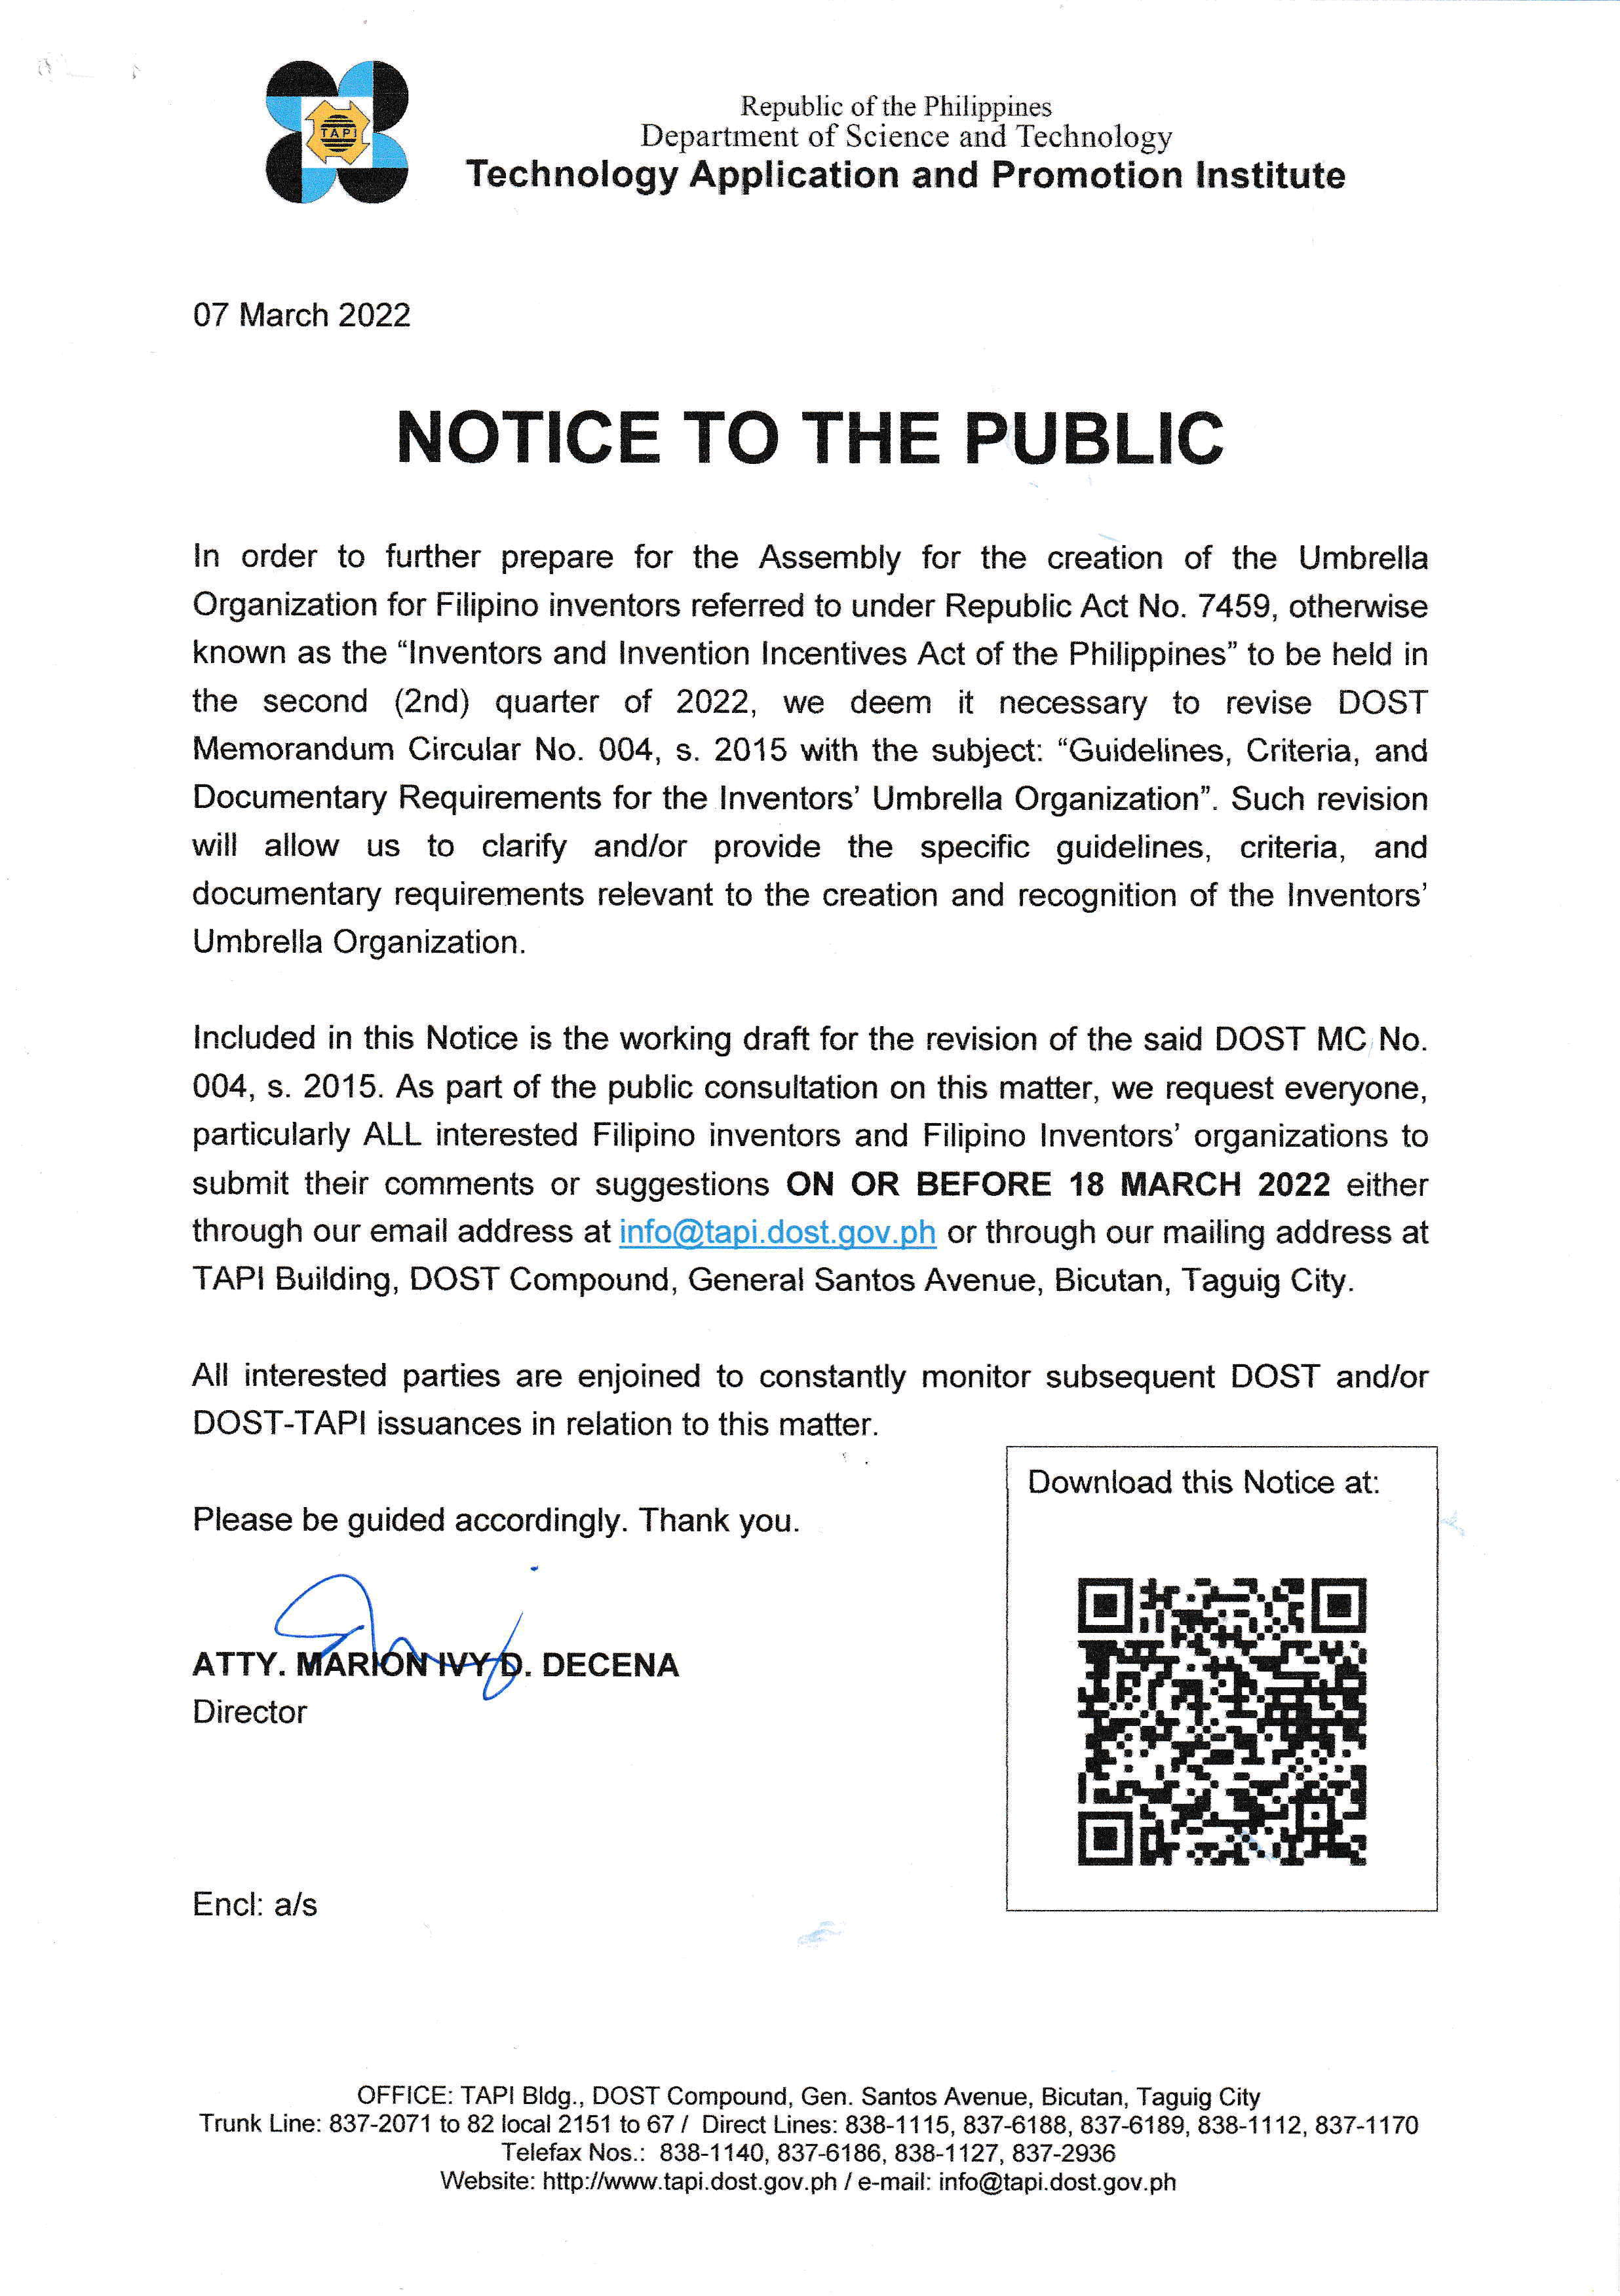 Notice to the Public dated 07 March 2022